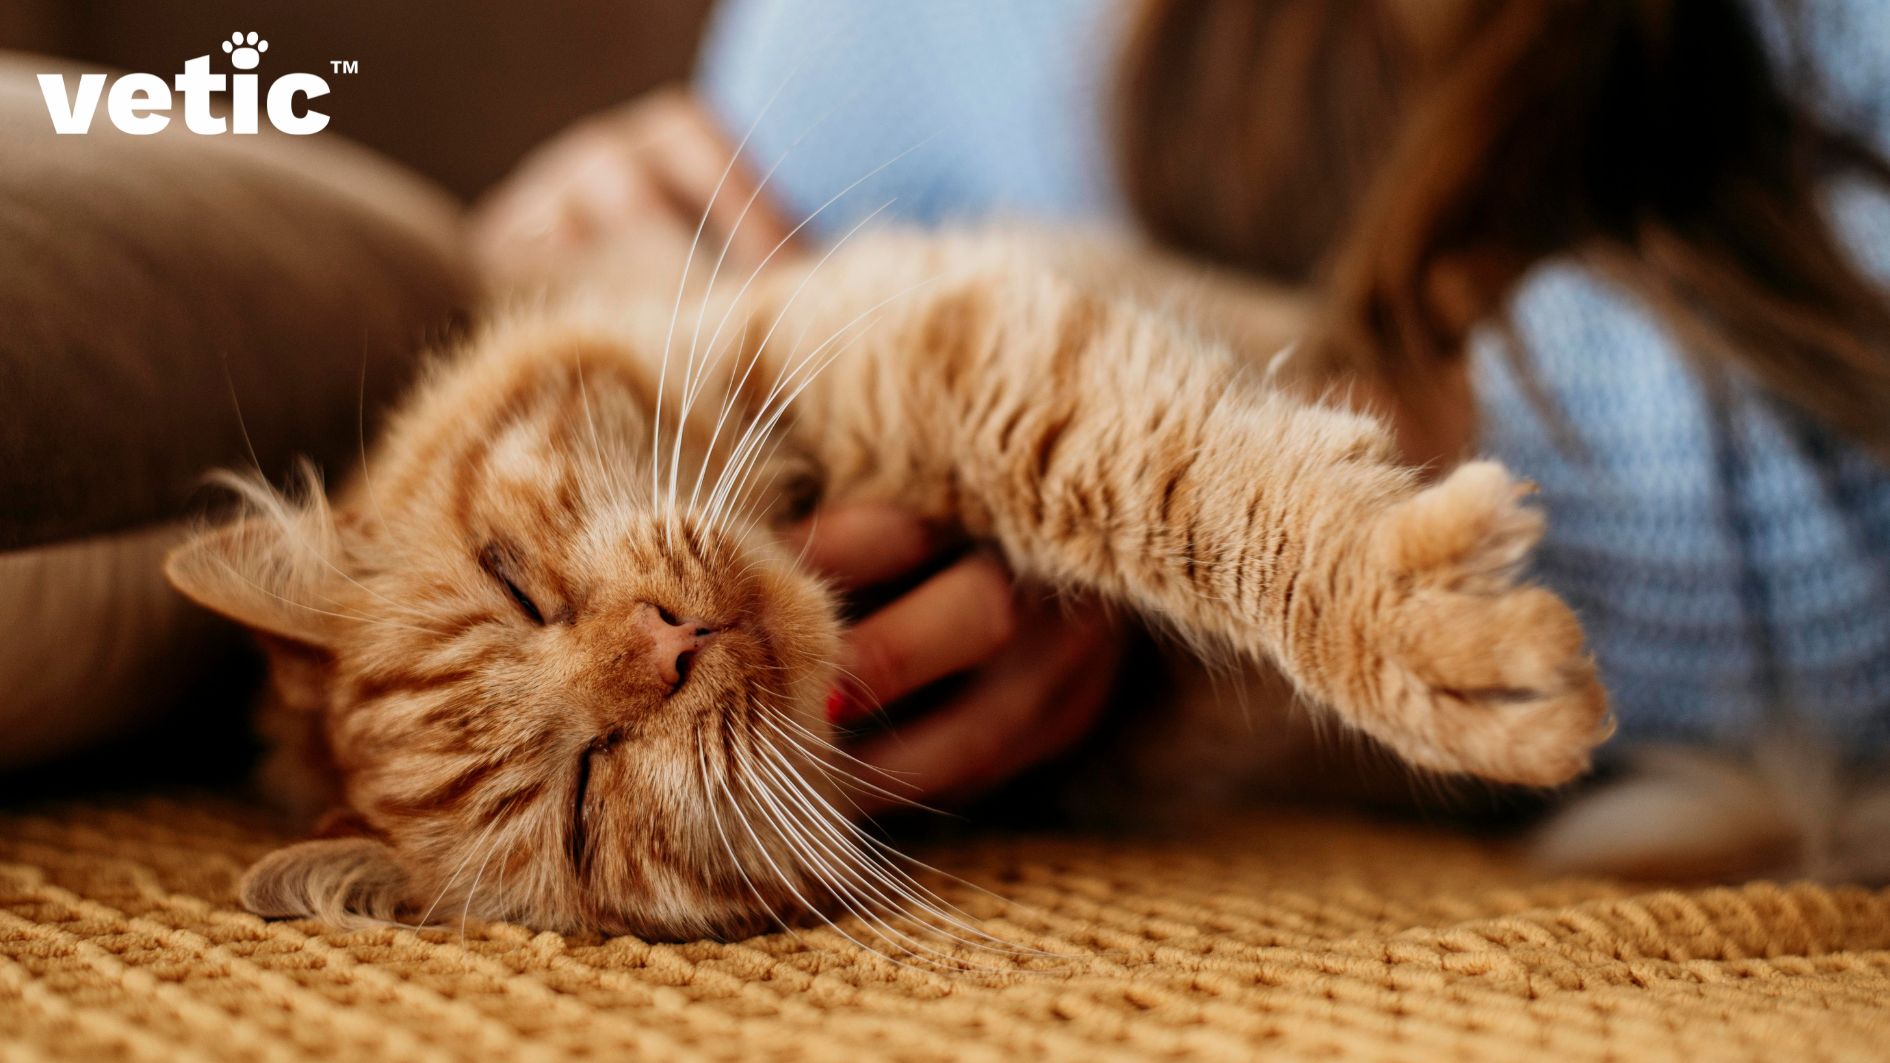 Short-medium coat ginger cat laying on his side receiving neck and chest scratches from a woman. Cats often show more affection when sexually mature and not neutered.